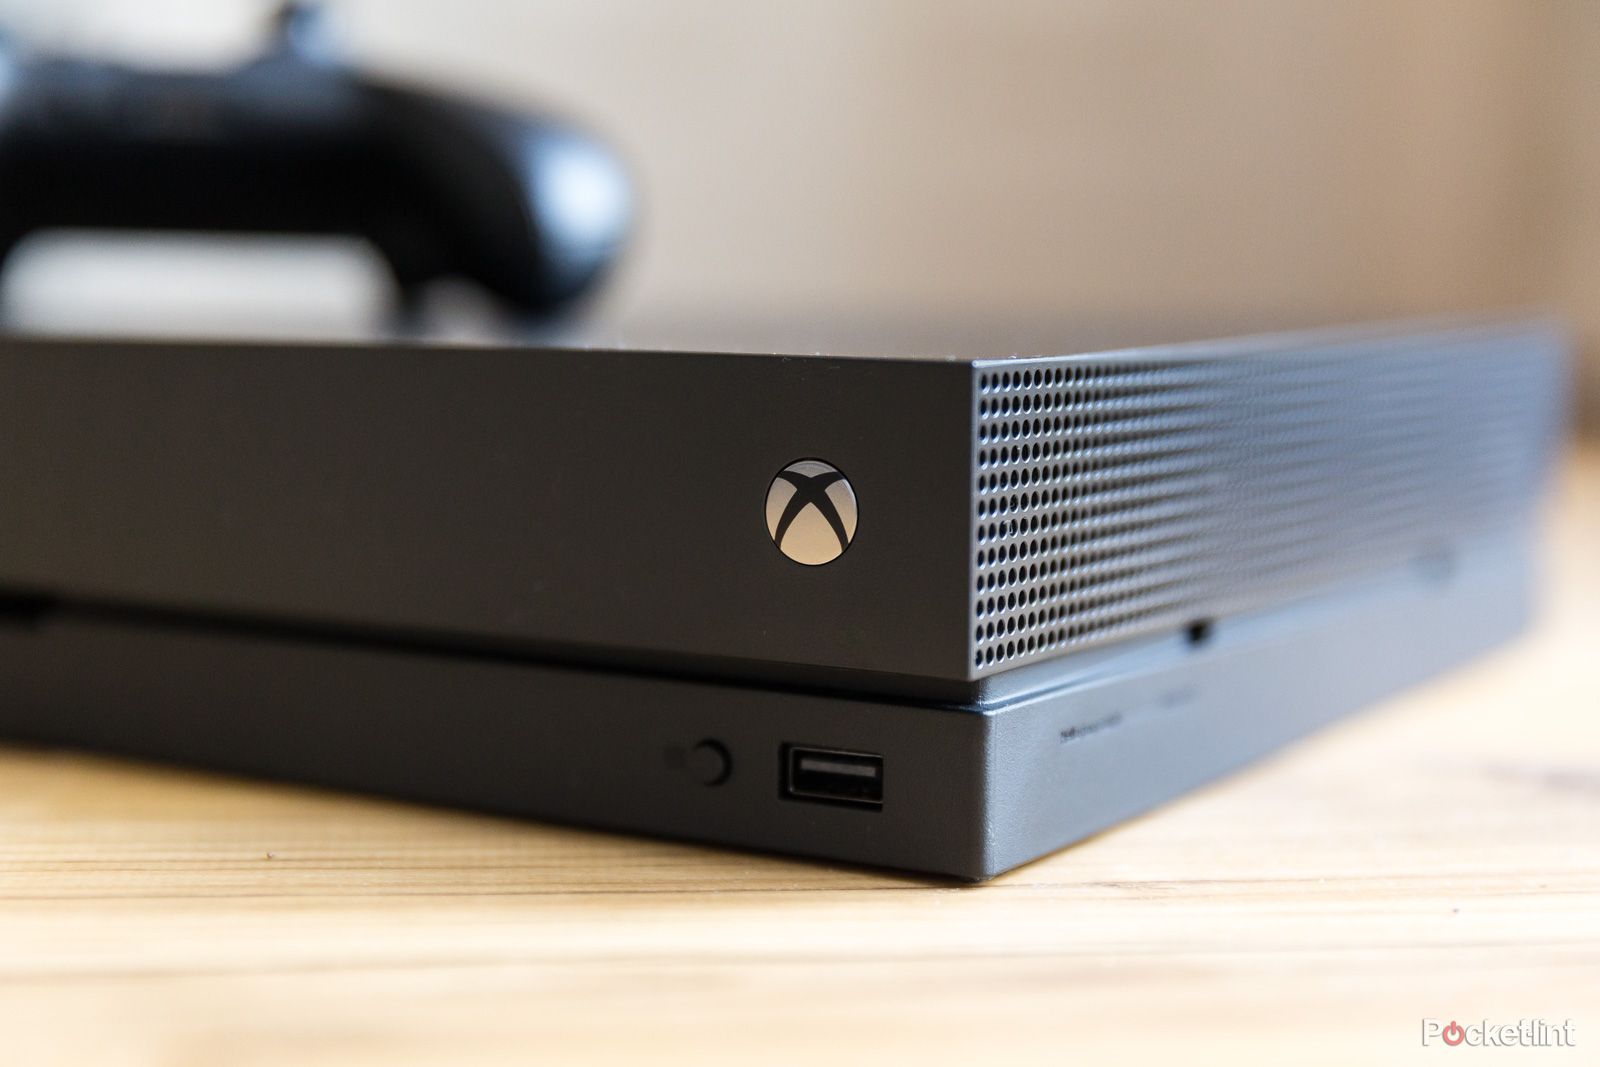 Xbox Series X vs Xbox One X: What's the difference?